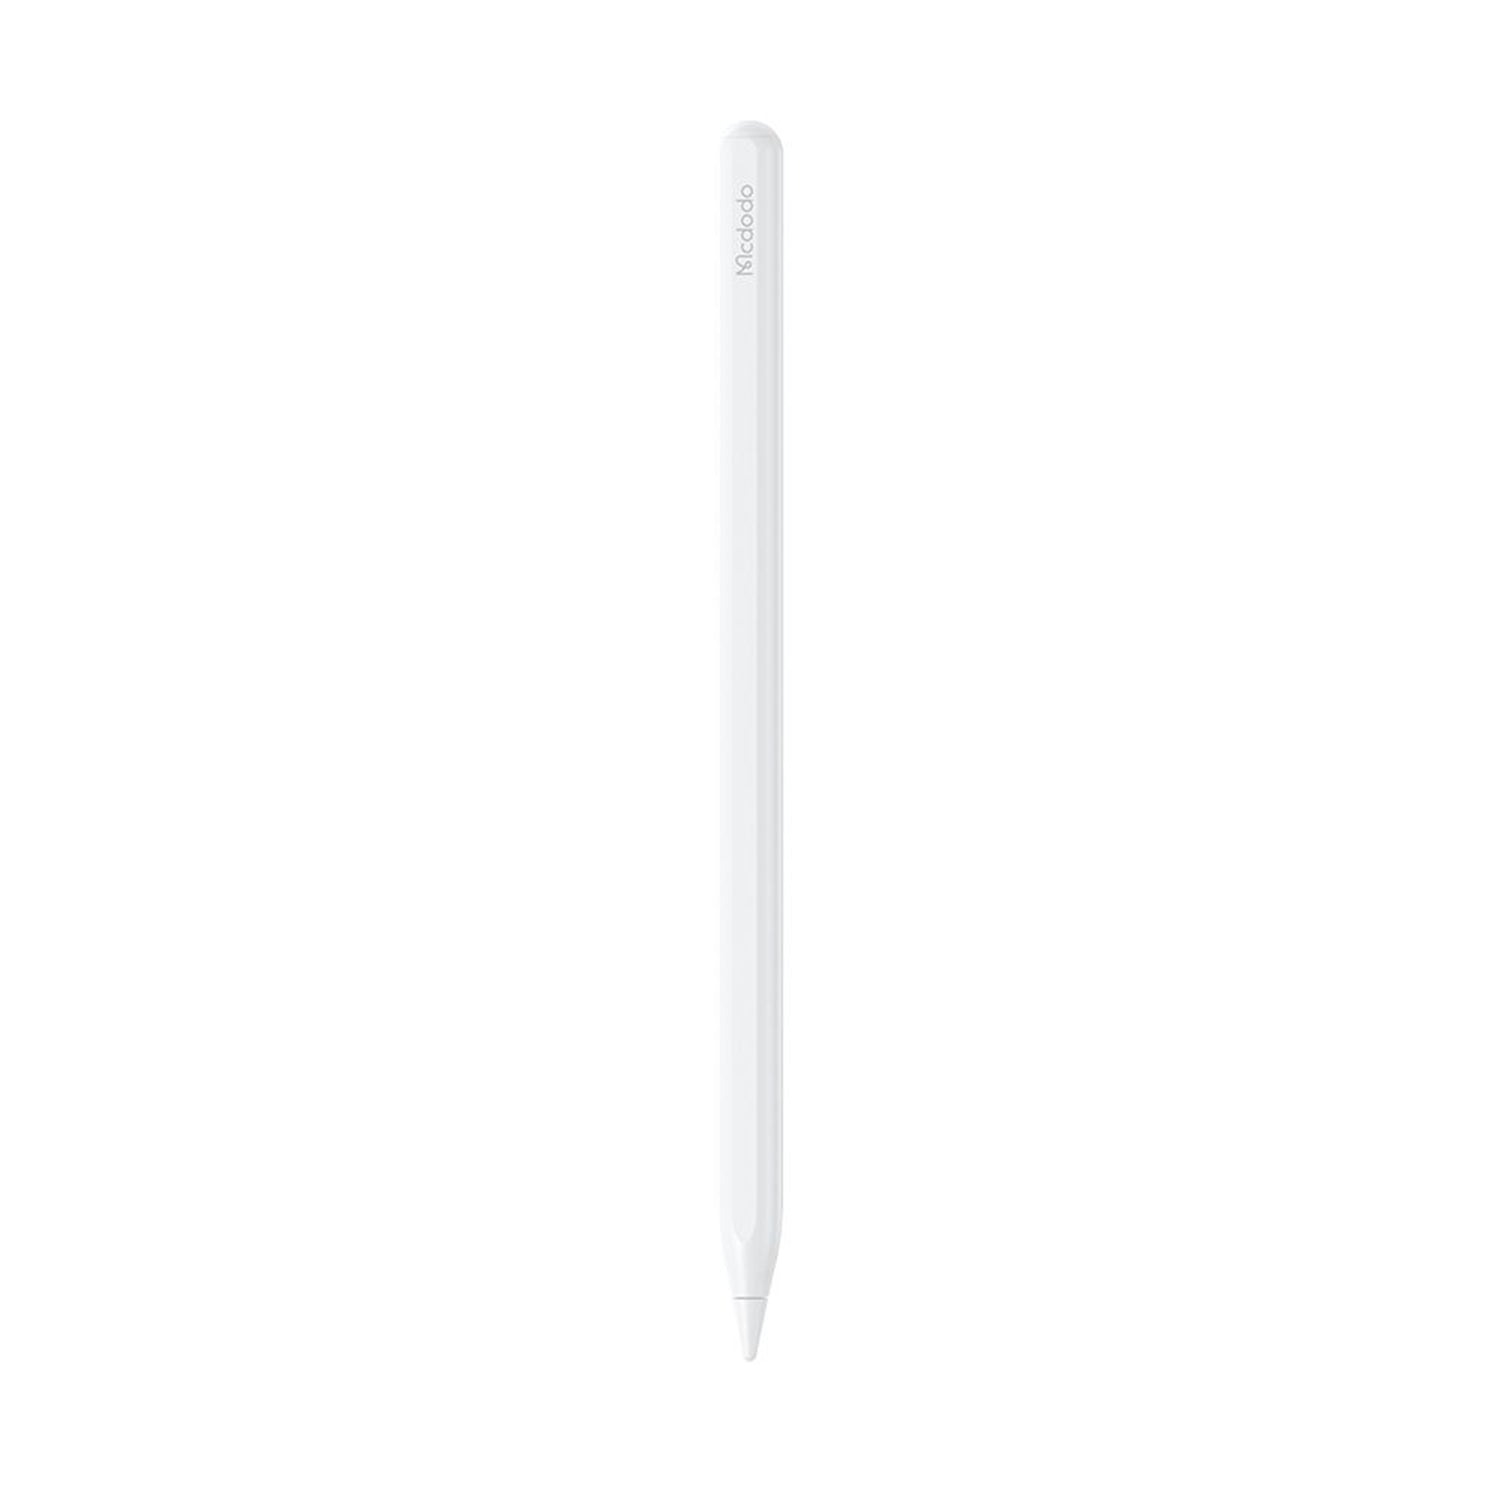 Mcdodo Stylus Pen for iPad (With Magnetic Charging Cable), White